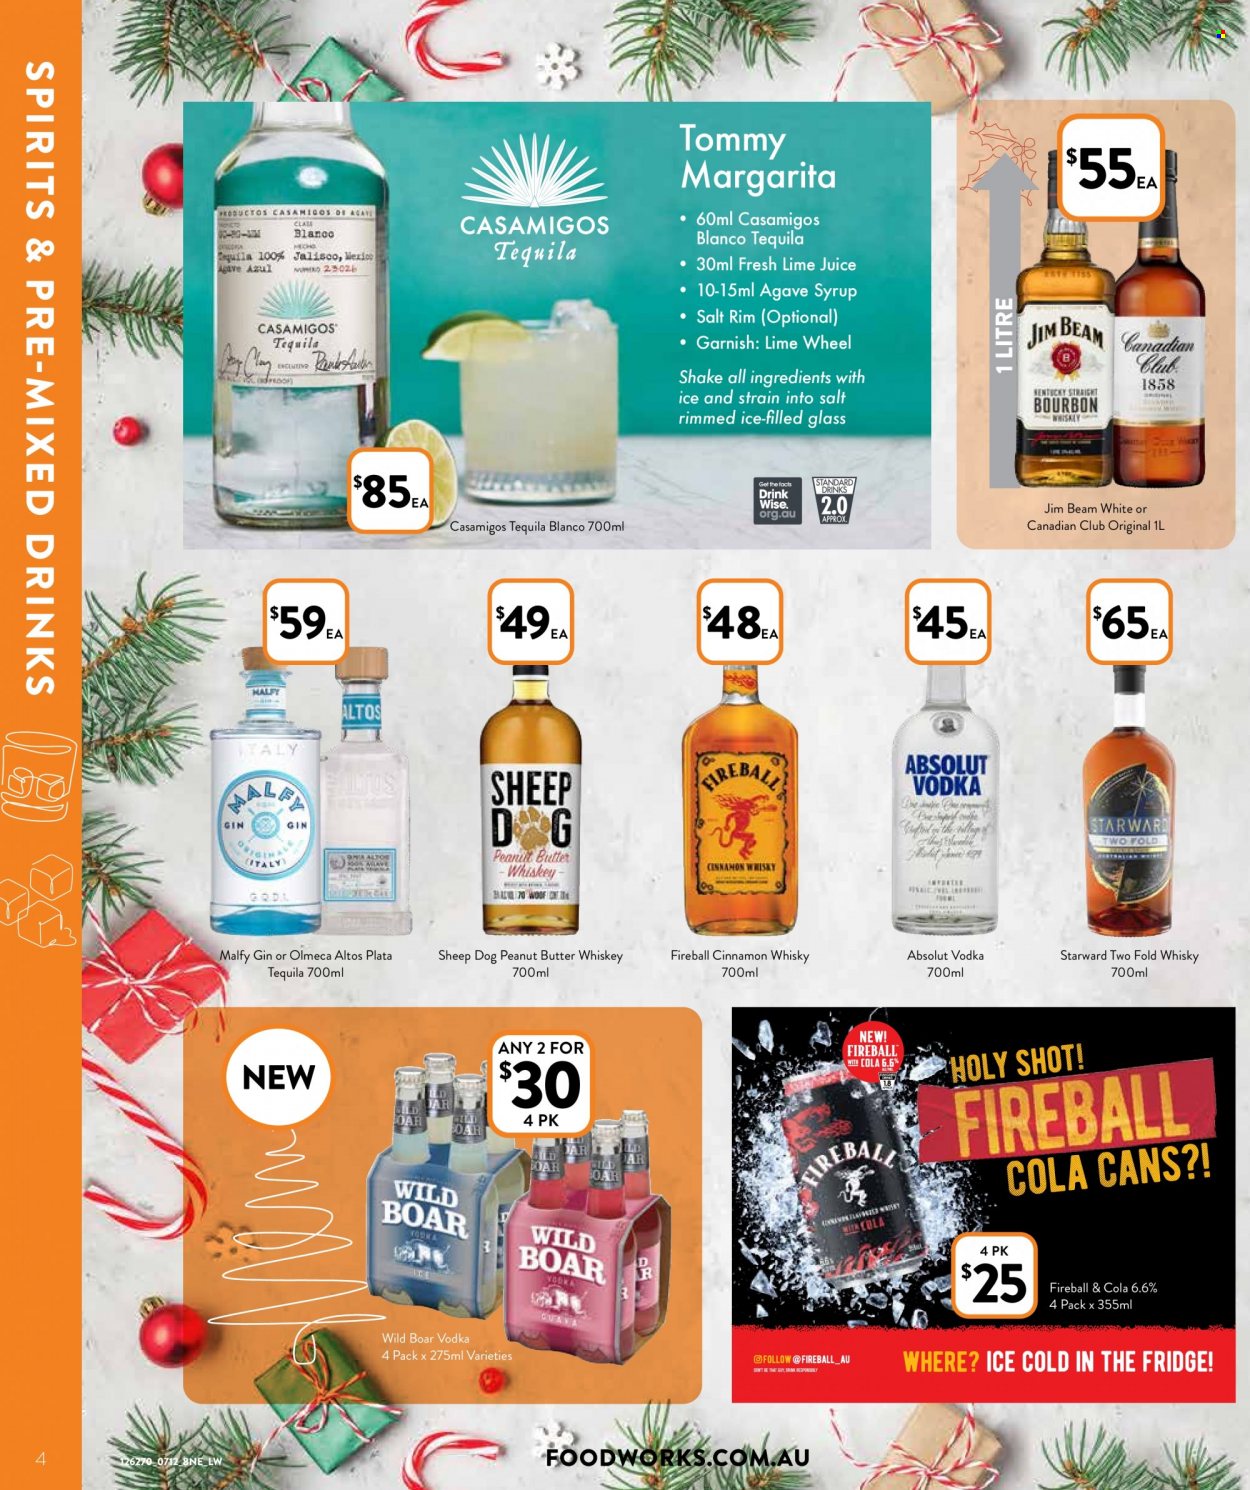 thumbnail - Foodworks Catalogue - 7 Dec 2022 - 20 Dec 2022 - Sales products - wild boar, boar meat, guava, cod, shake, Flora, peanut butter, syrup, bourbon, gin, tequila, vodka, whiskey, Absolut, Olmeca, Jim Beam, cinnamon whisky, whisky, Joy. Page 4.